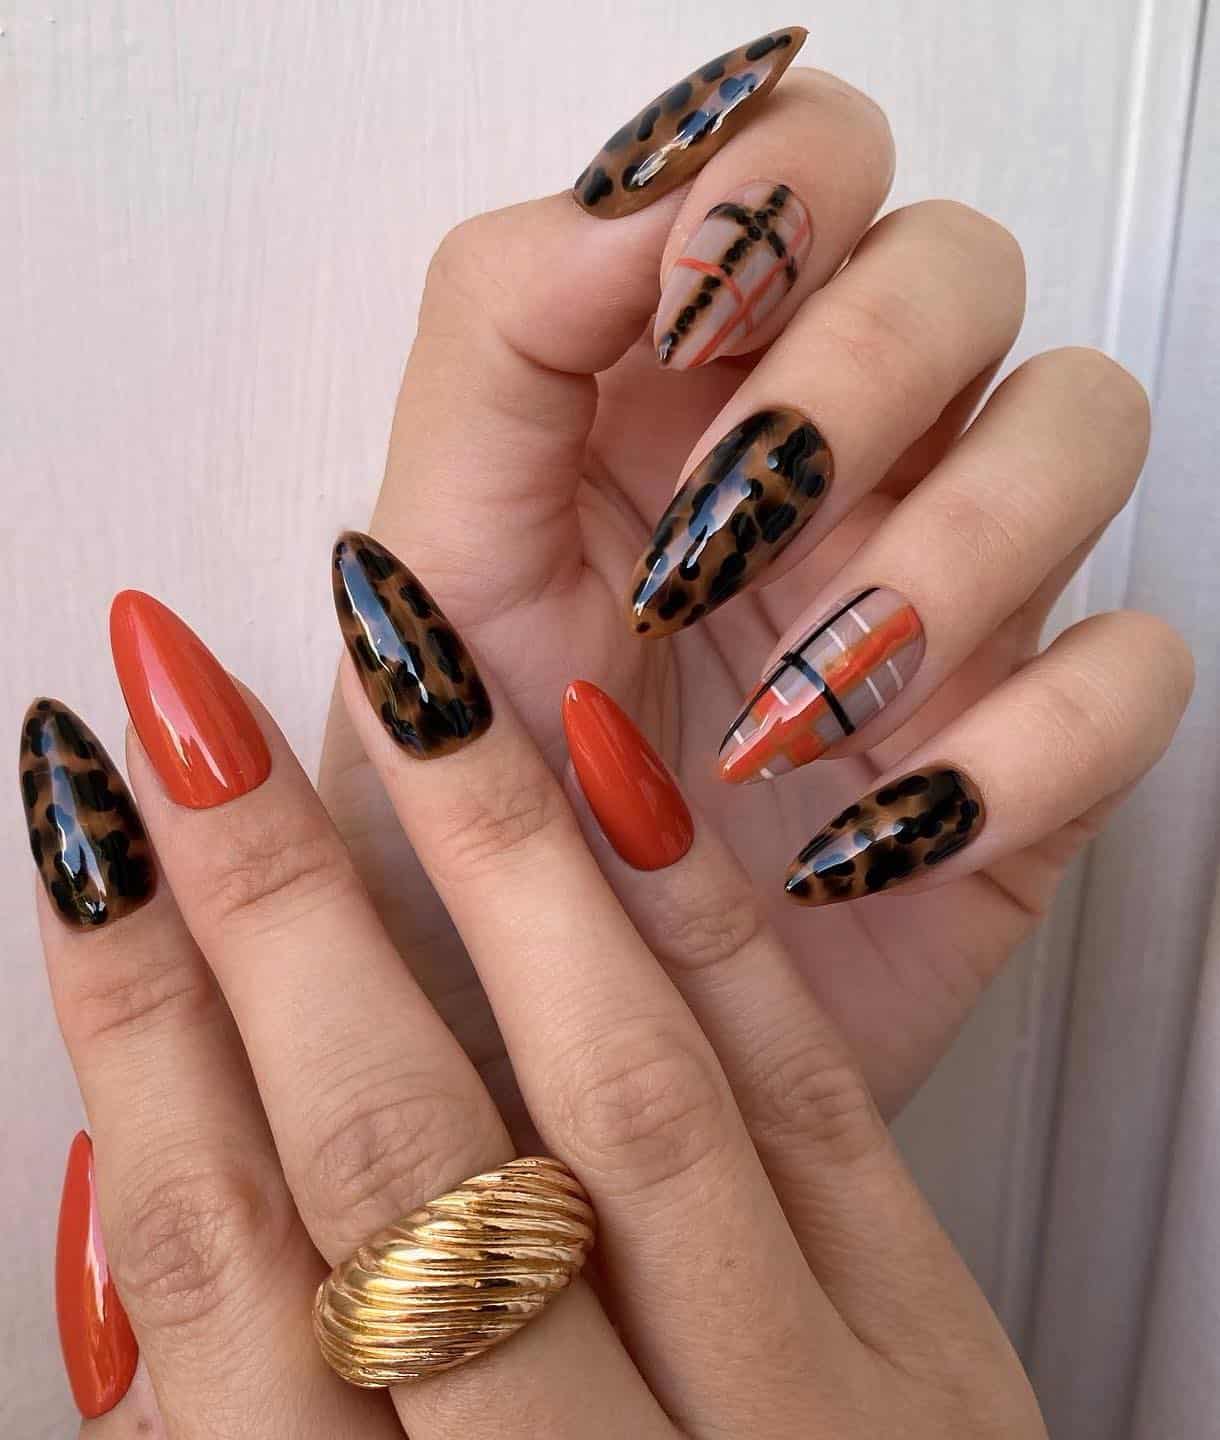 a hand with medium stiletto nails featuring multiple designs including solid colored burnt orange nails, black and brown tortoise shell nails, and black, white, and orange plaid nails